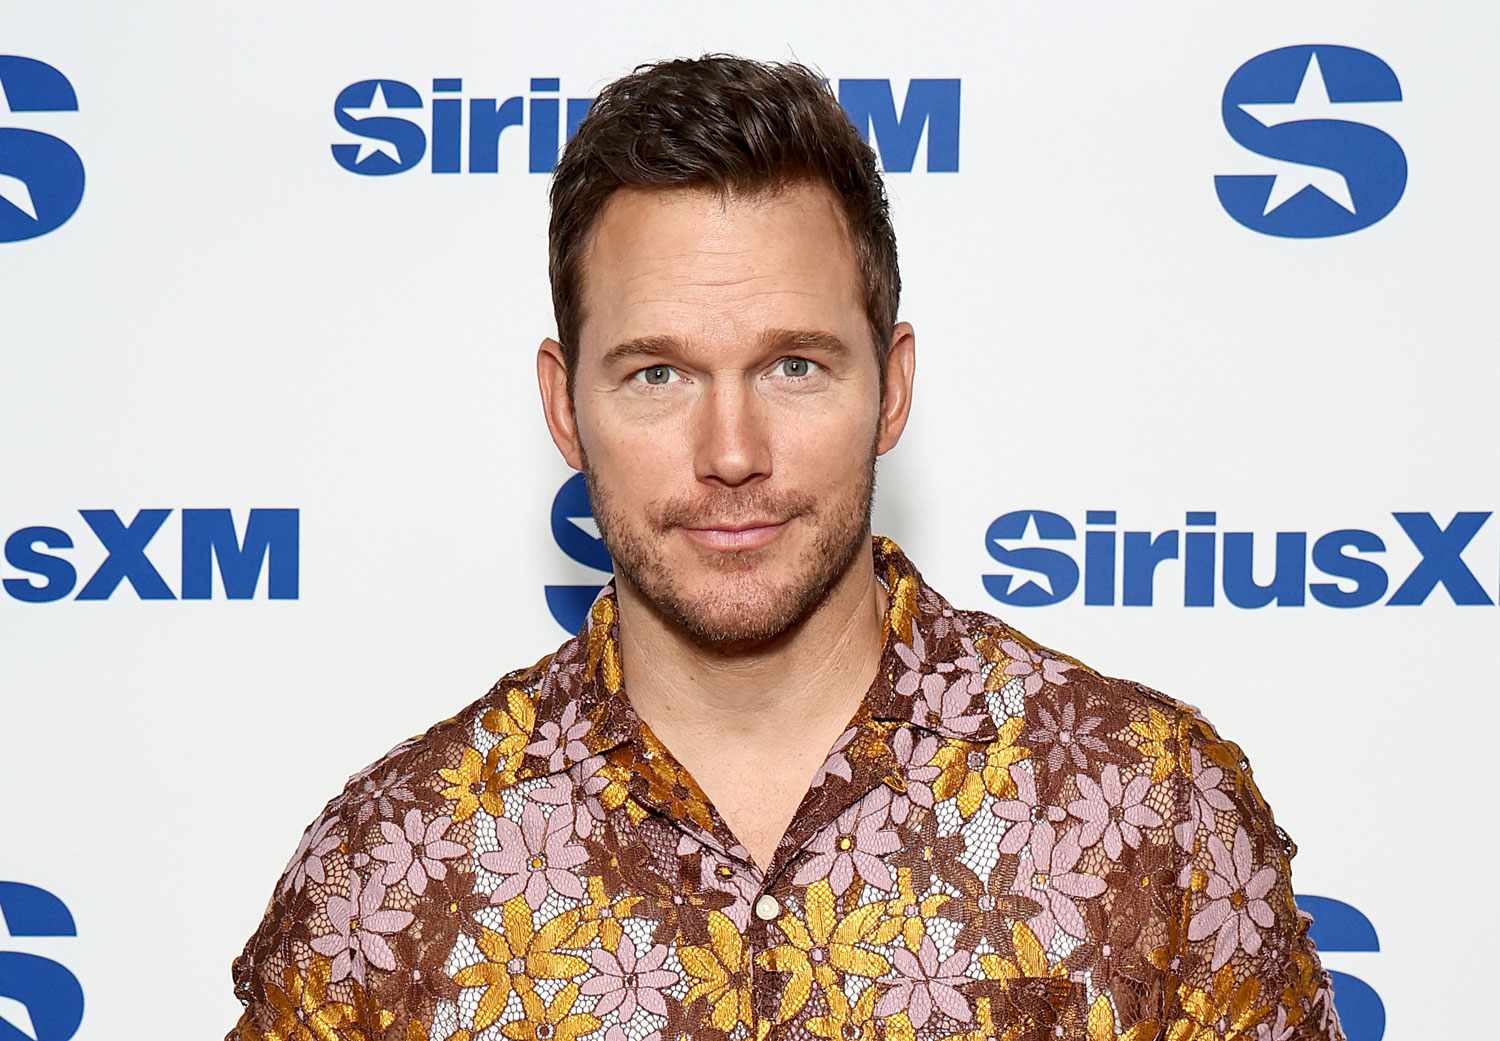 Chris Pratt Shares How 'Fairly Complicated' Relationship with His Late Dad Affects His Roles